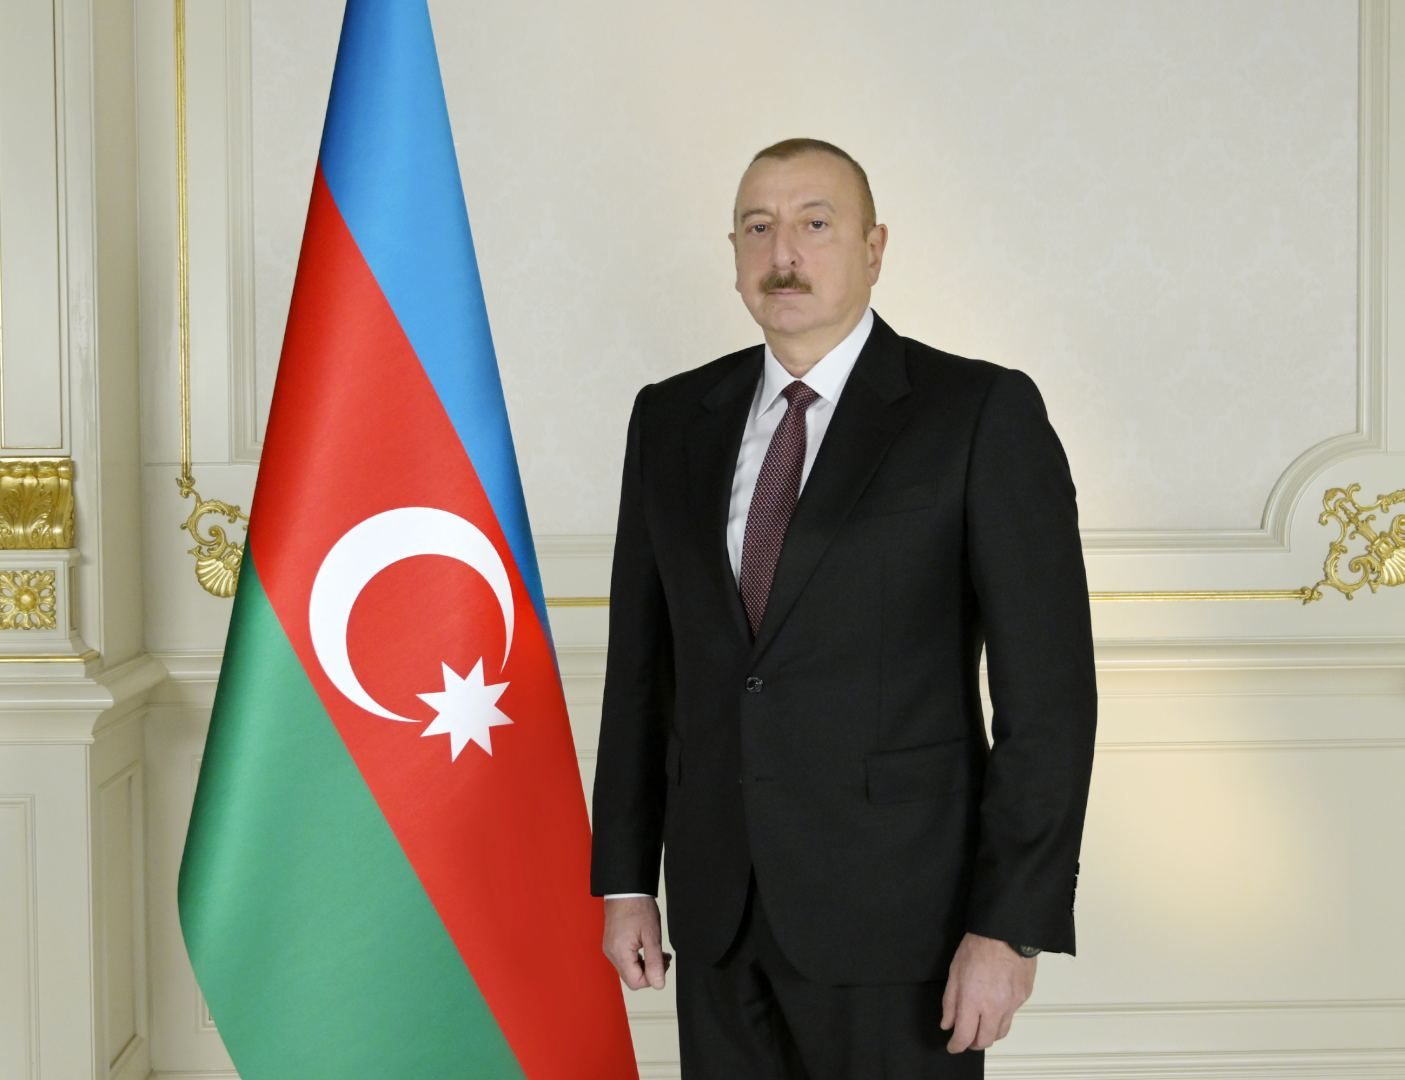 President Ilham Aliyev arrives in Romania for working visit